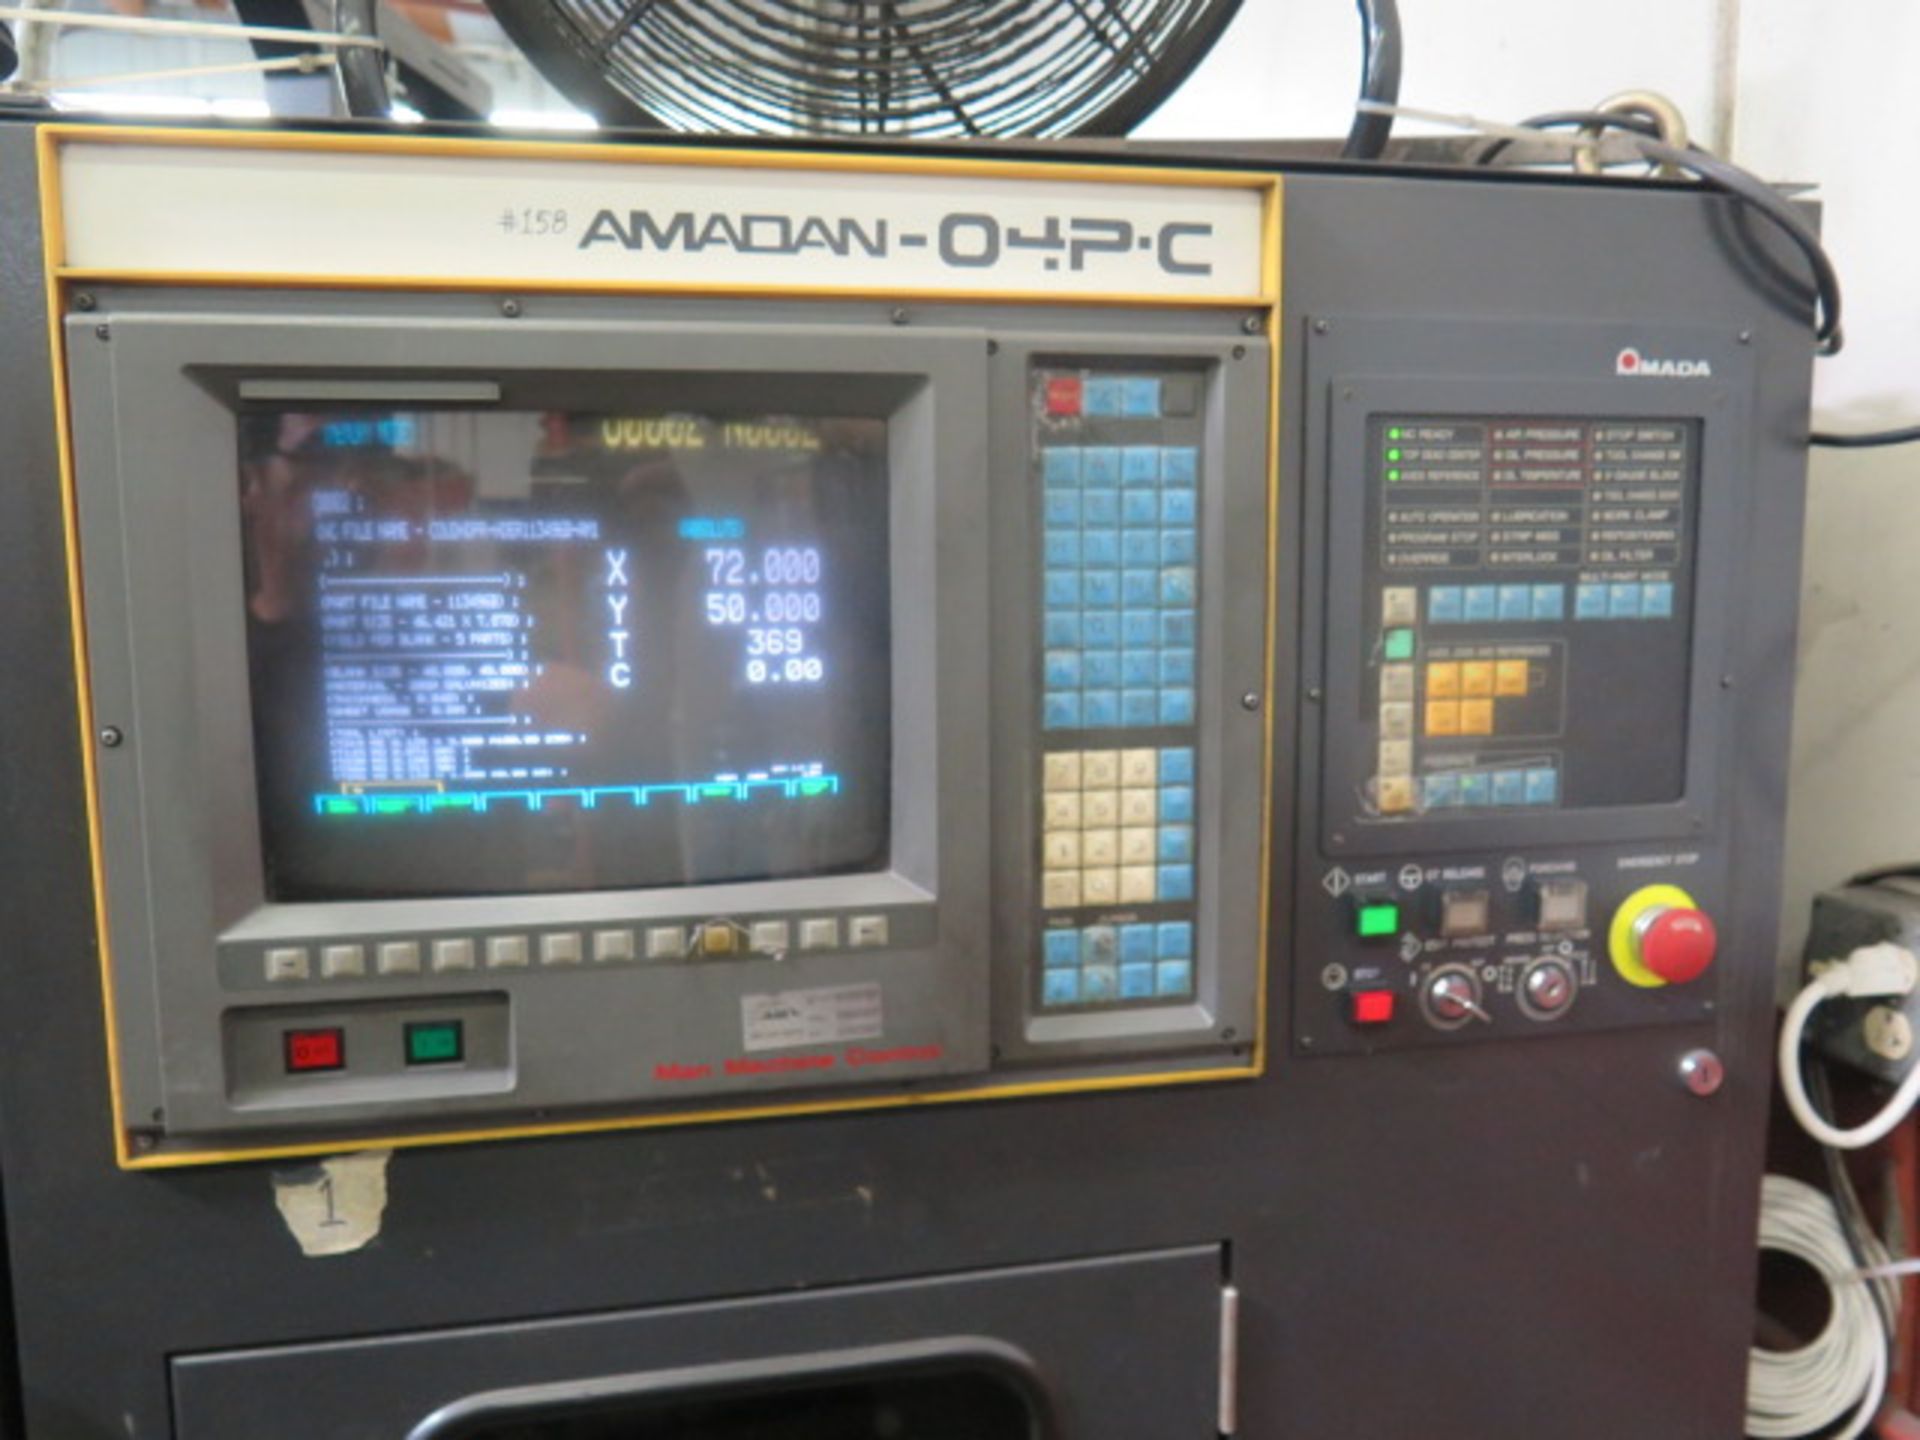 1998 Amada VIPROS 357 QUEEN 30 Ton CNC Turret Punch Press s/n 35730345 w/ O4P-C Controls, SOLD AS IS - Image 16 of 30